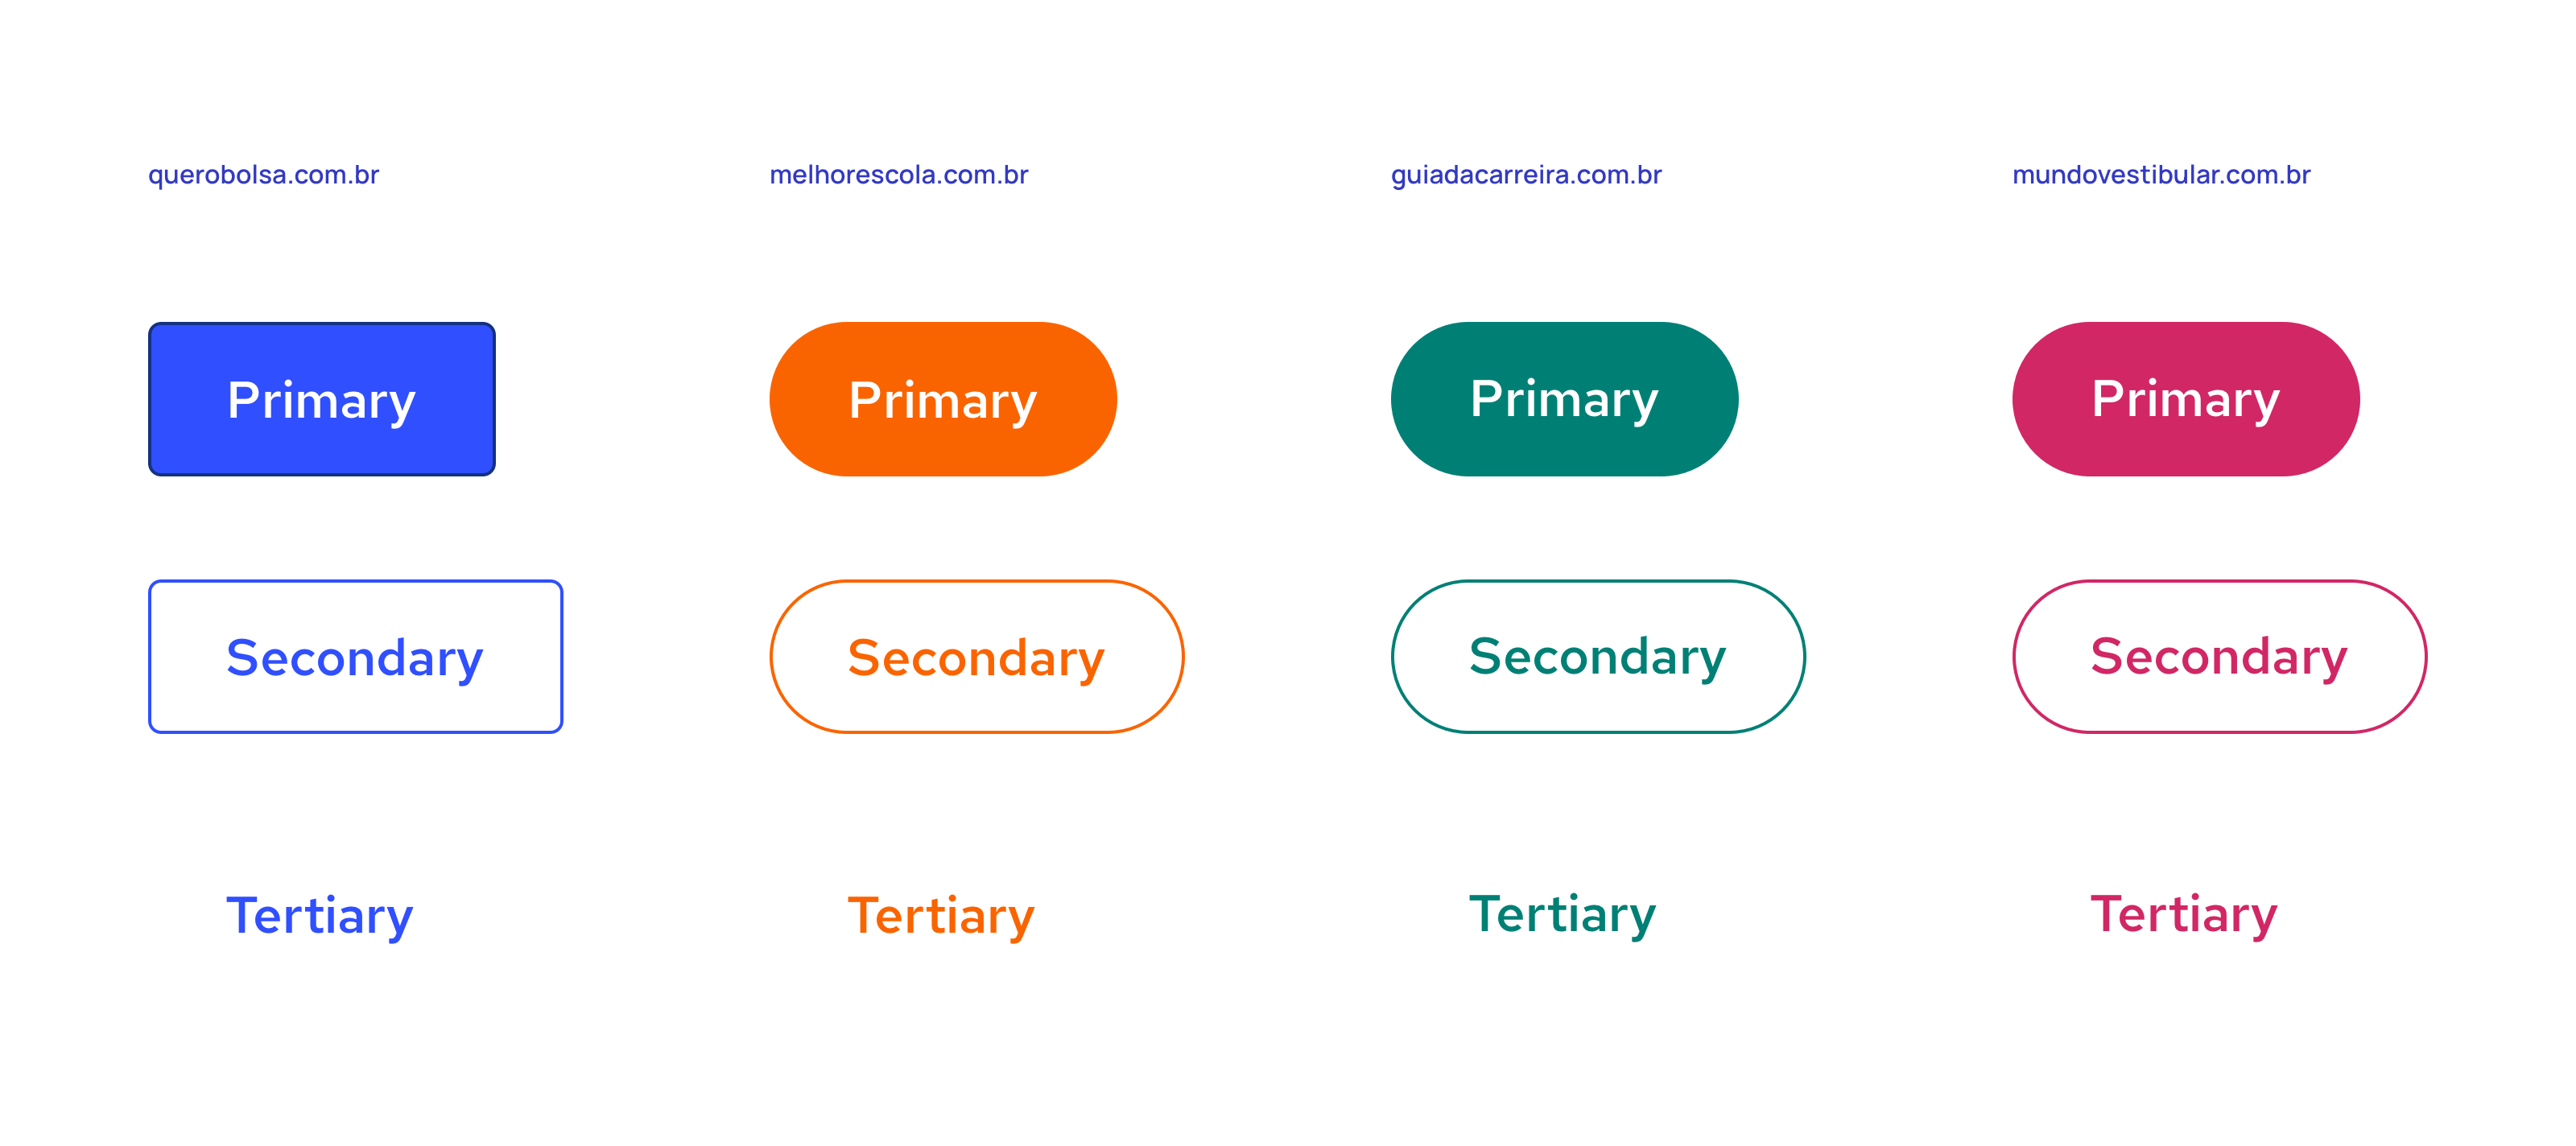 Examples of buttons on different themes for different sites